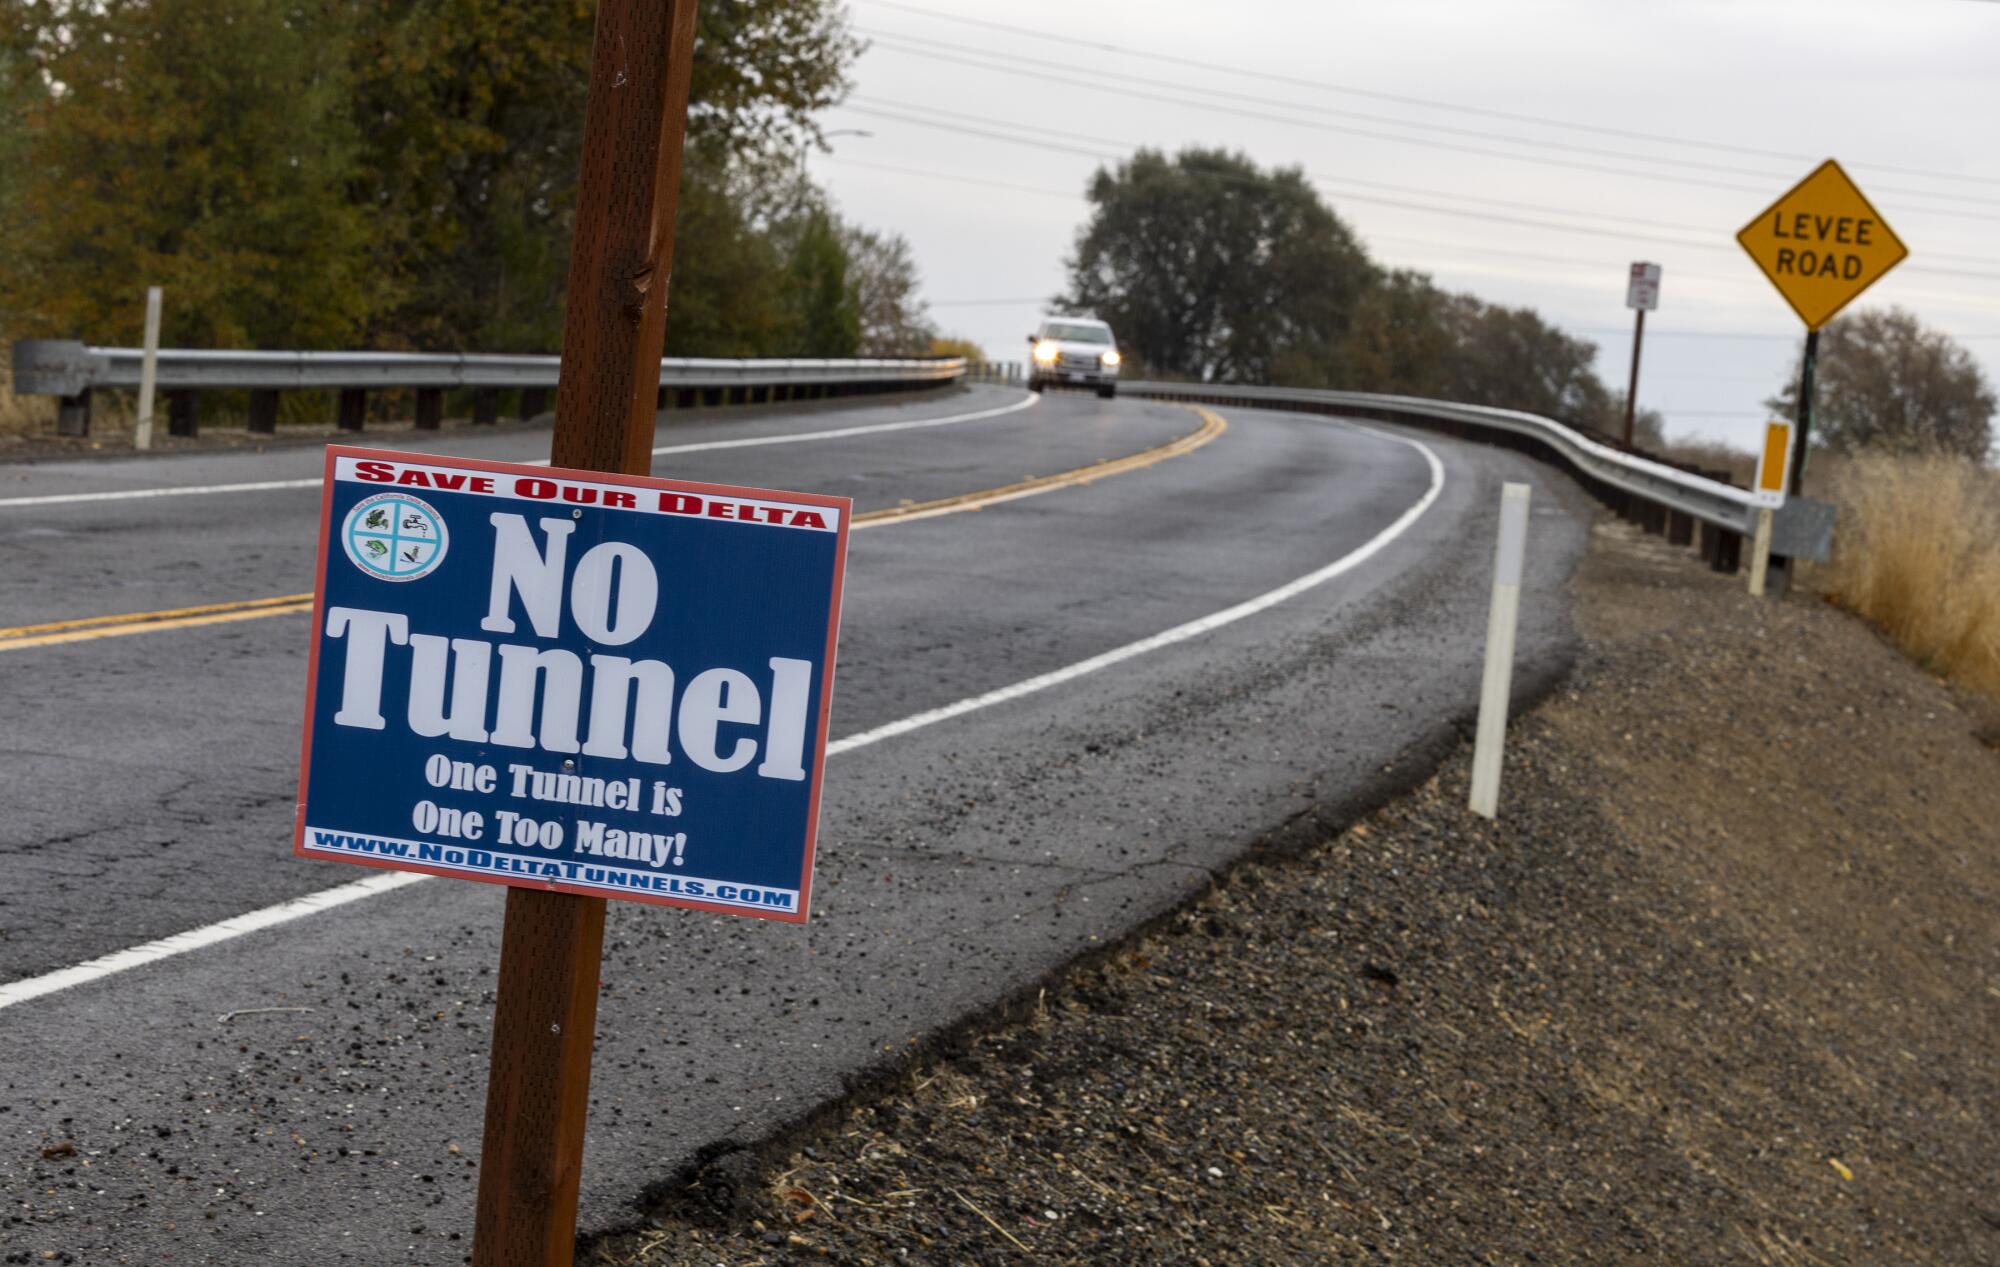 A sign reading "No Tunnel" stands at a curve on a rural road.